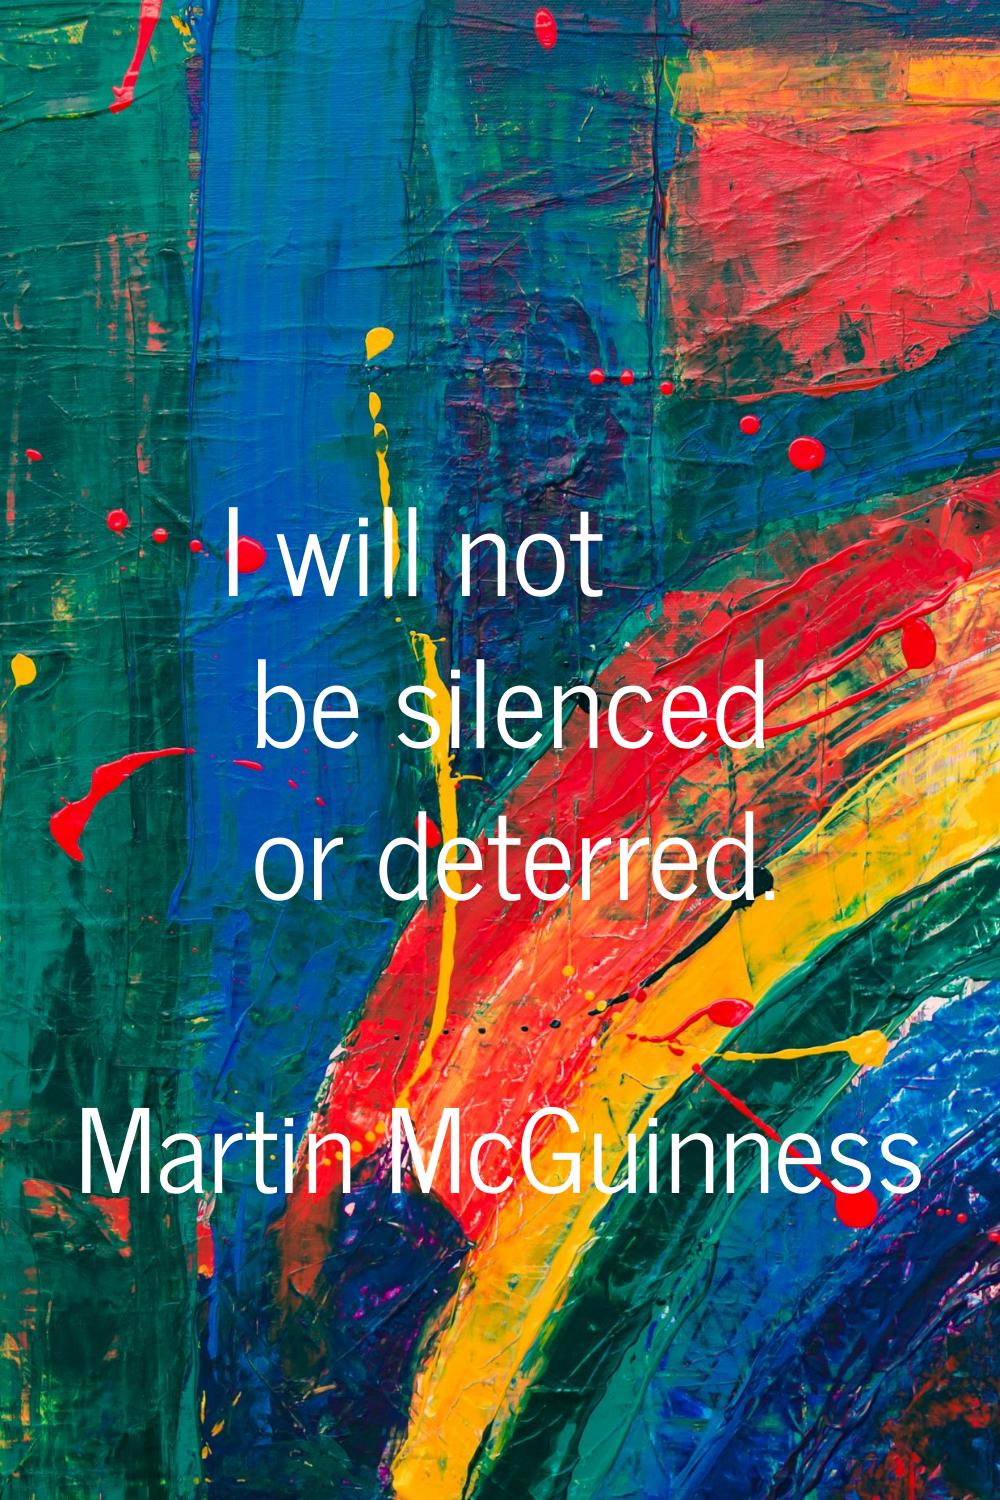 I will not be silenced or deterred.